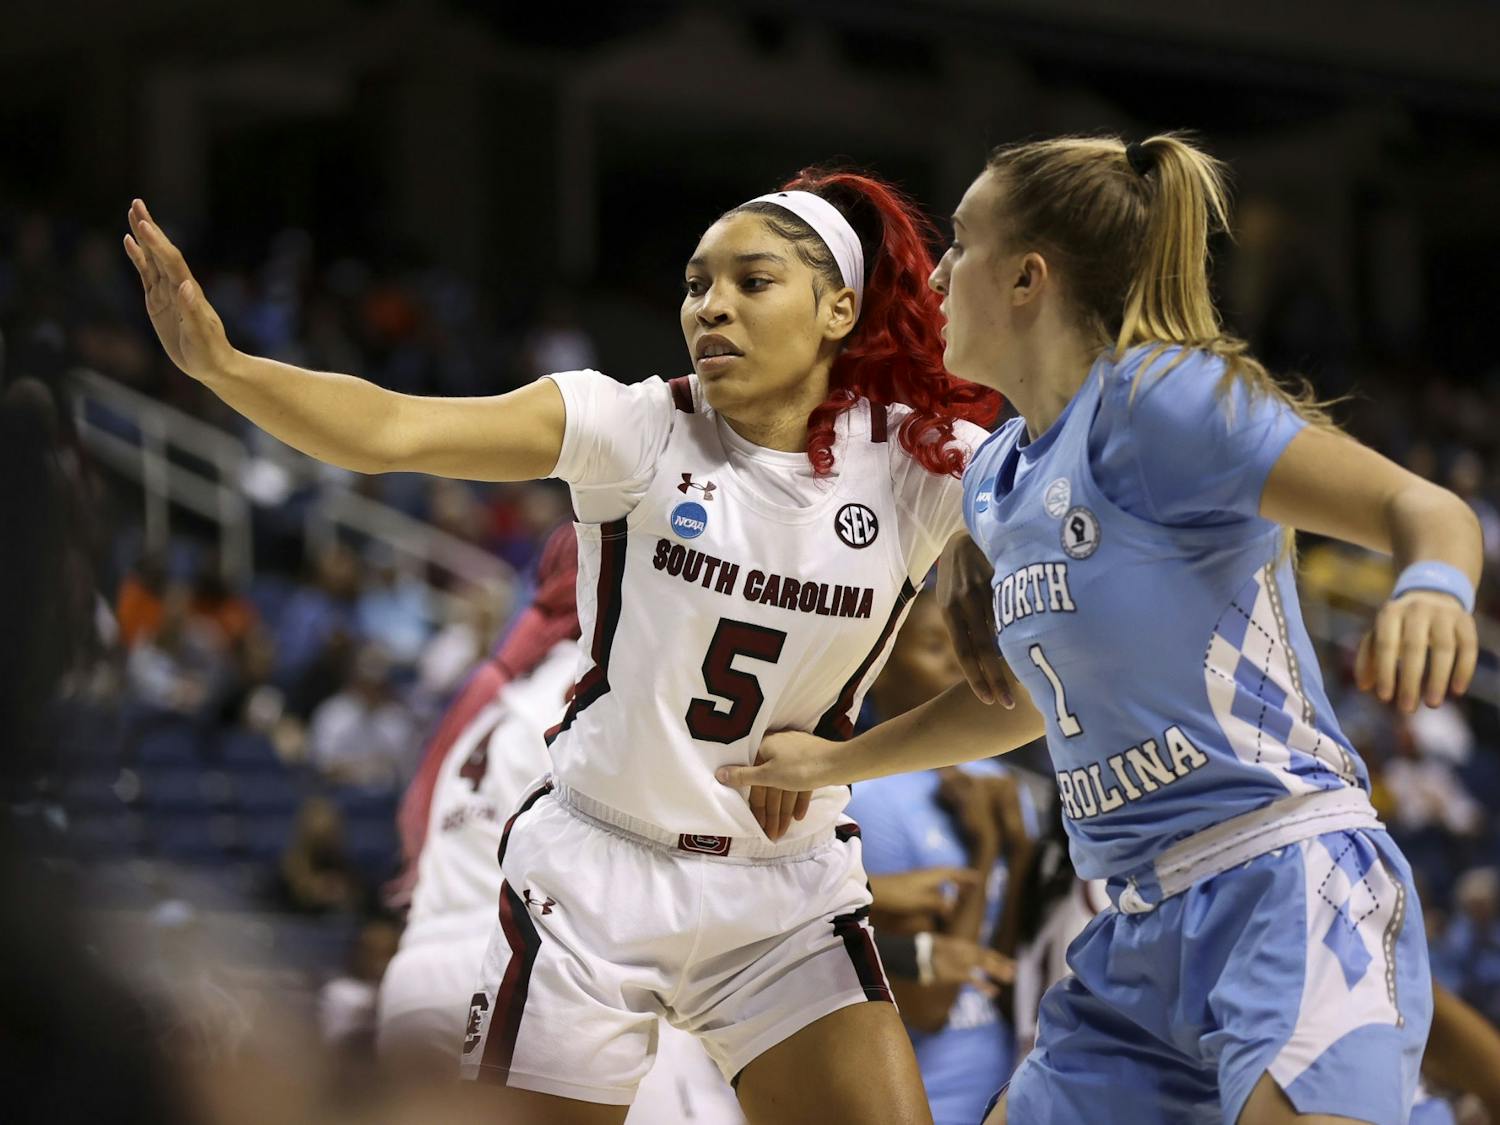 Senior forward Victoria Saxton on defense during the first quarter of South Carolina's 69-61 victory over North Carolina in the Sweet Sixteen on March 25, 2022.